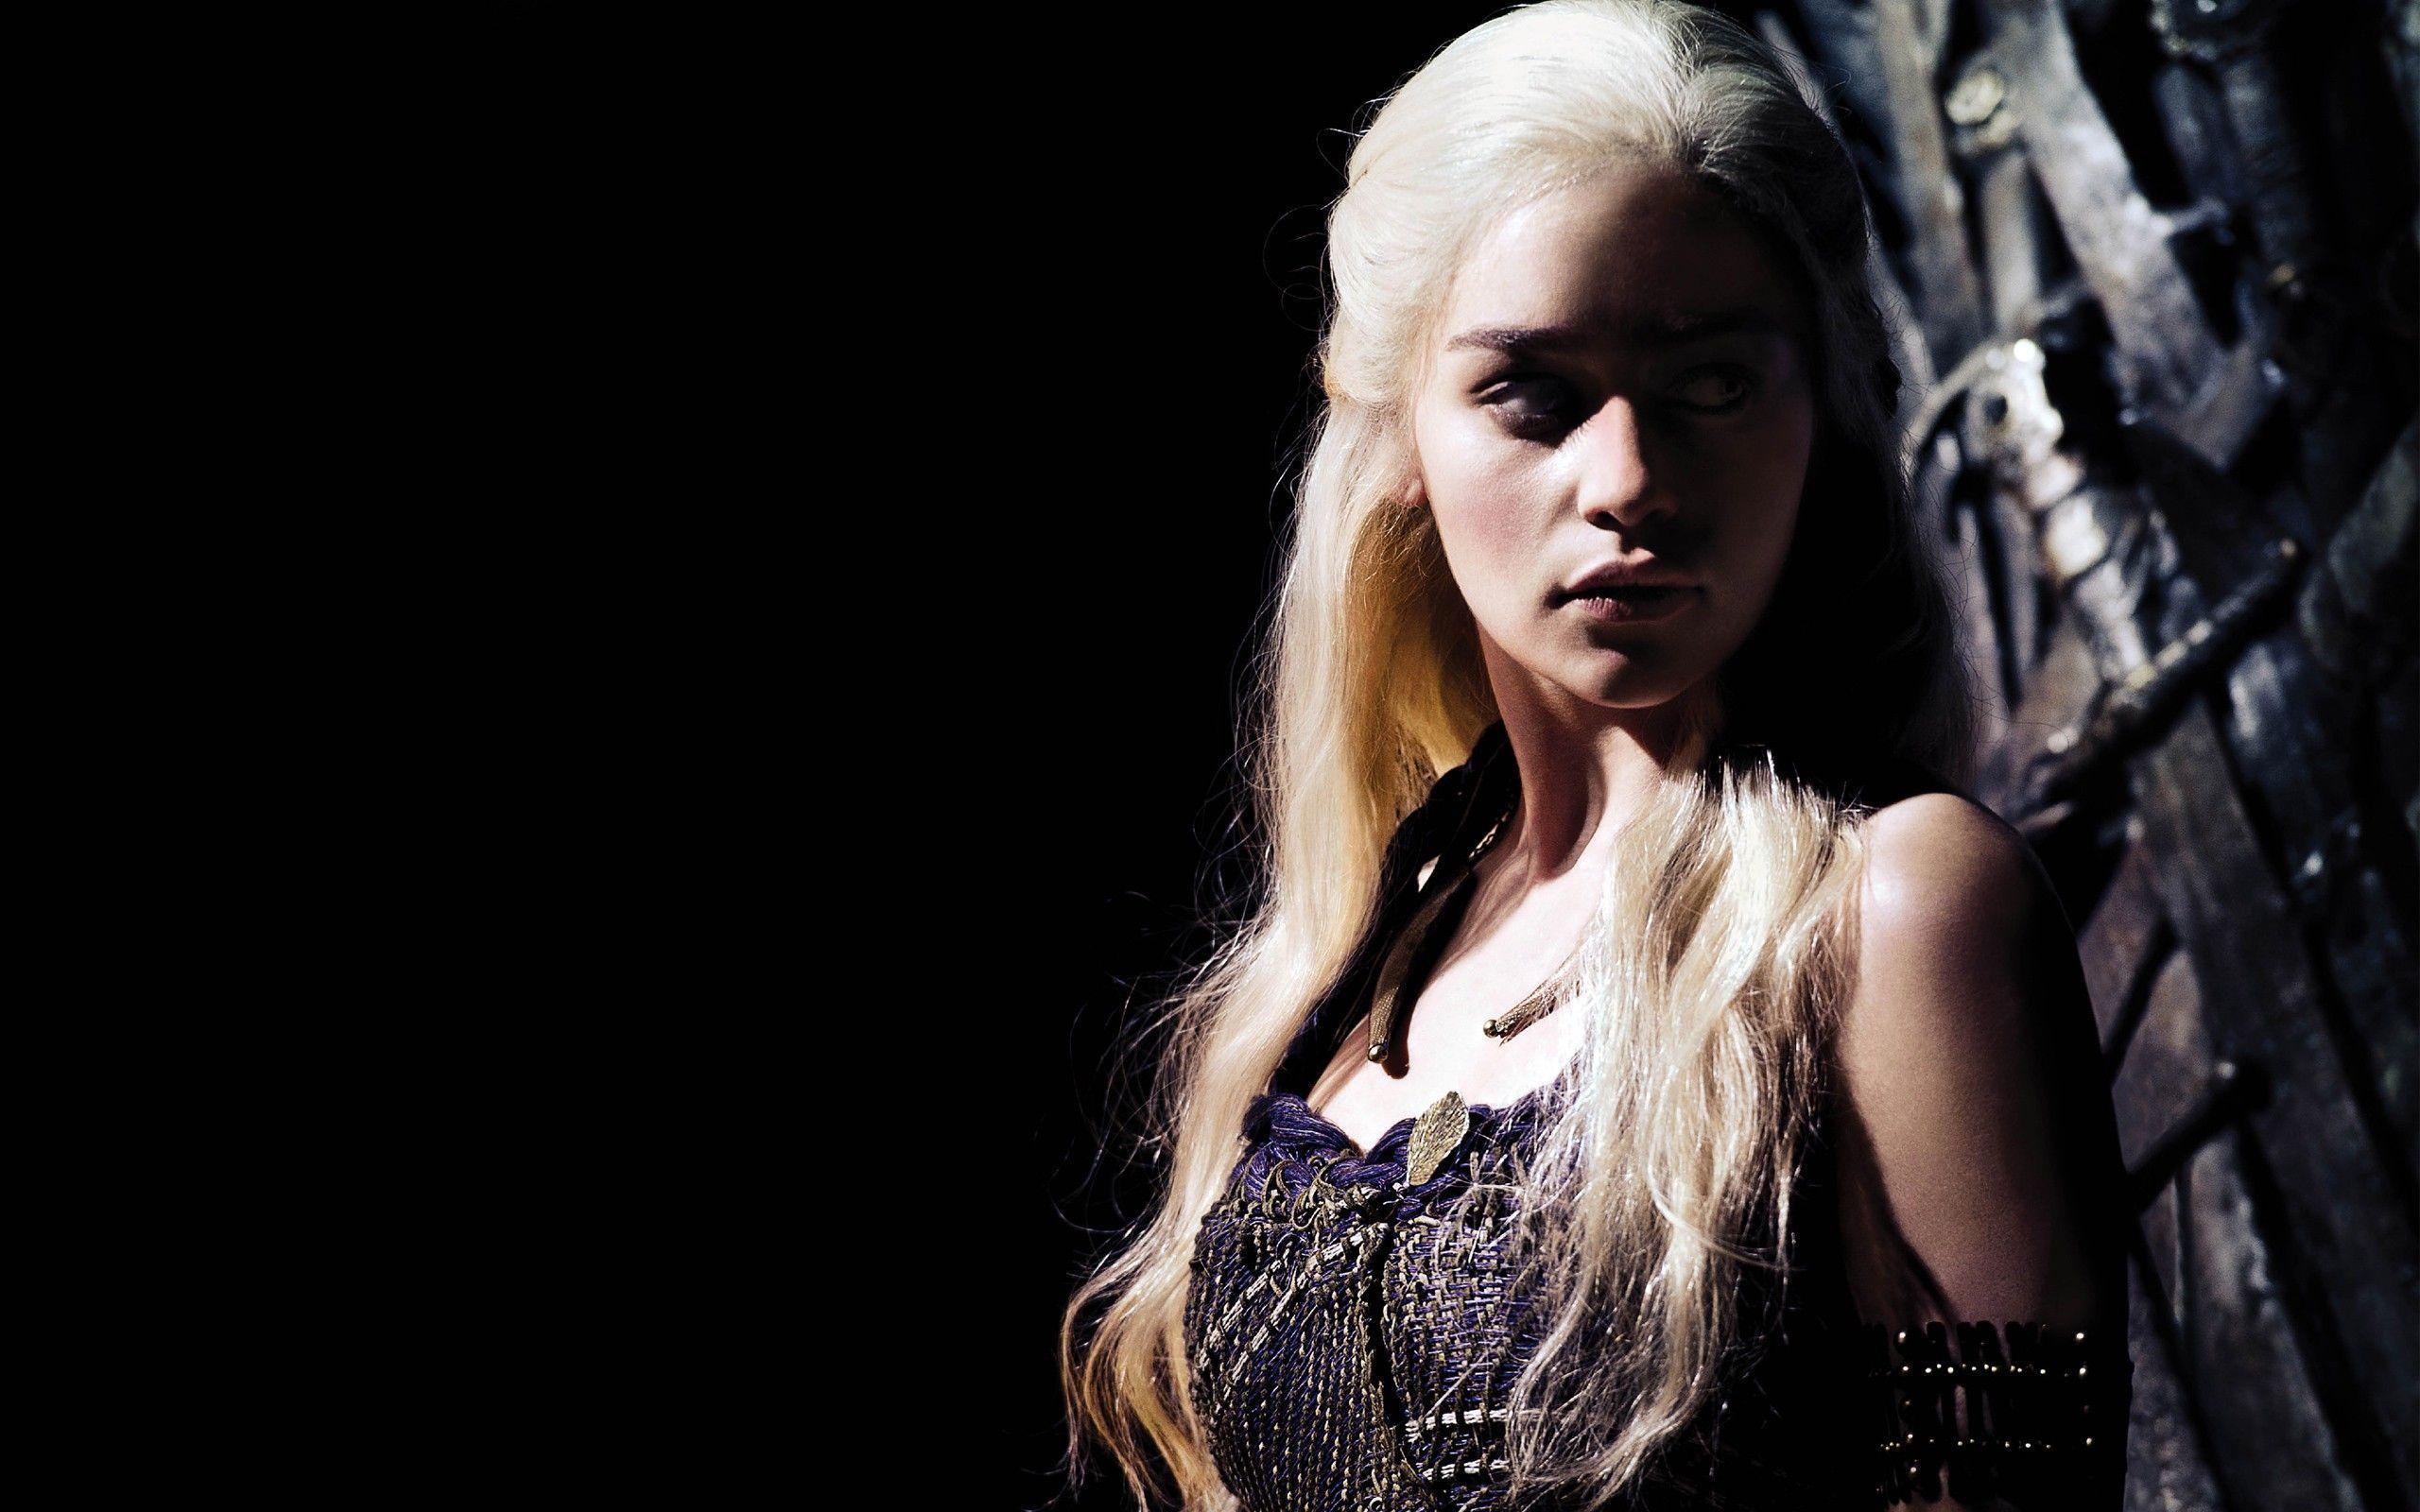 Game Of Thrones HD Wallpaper